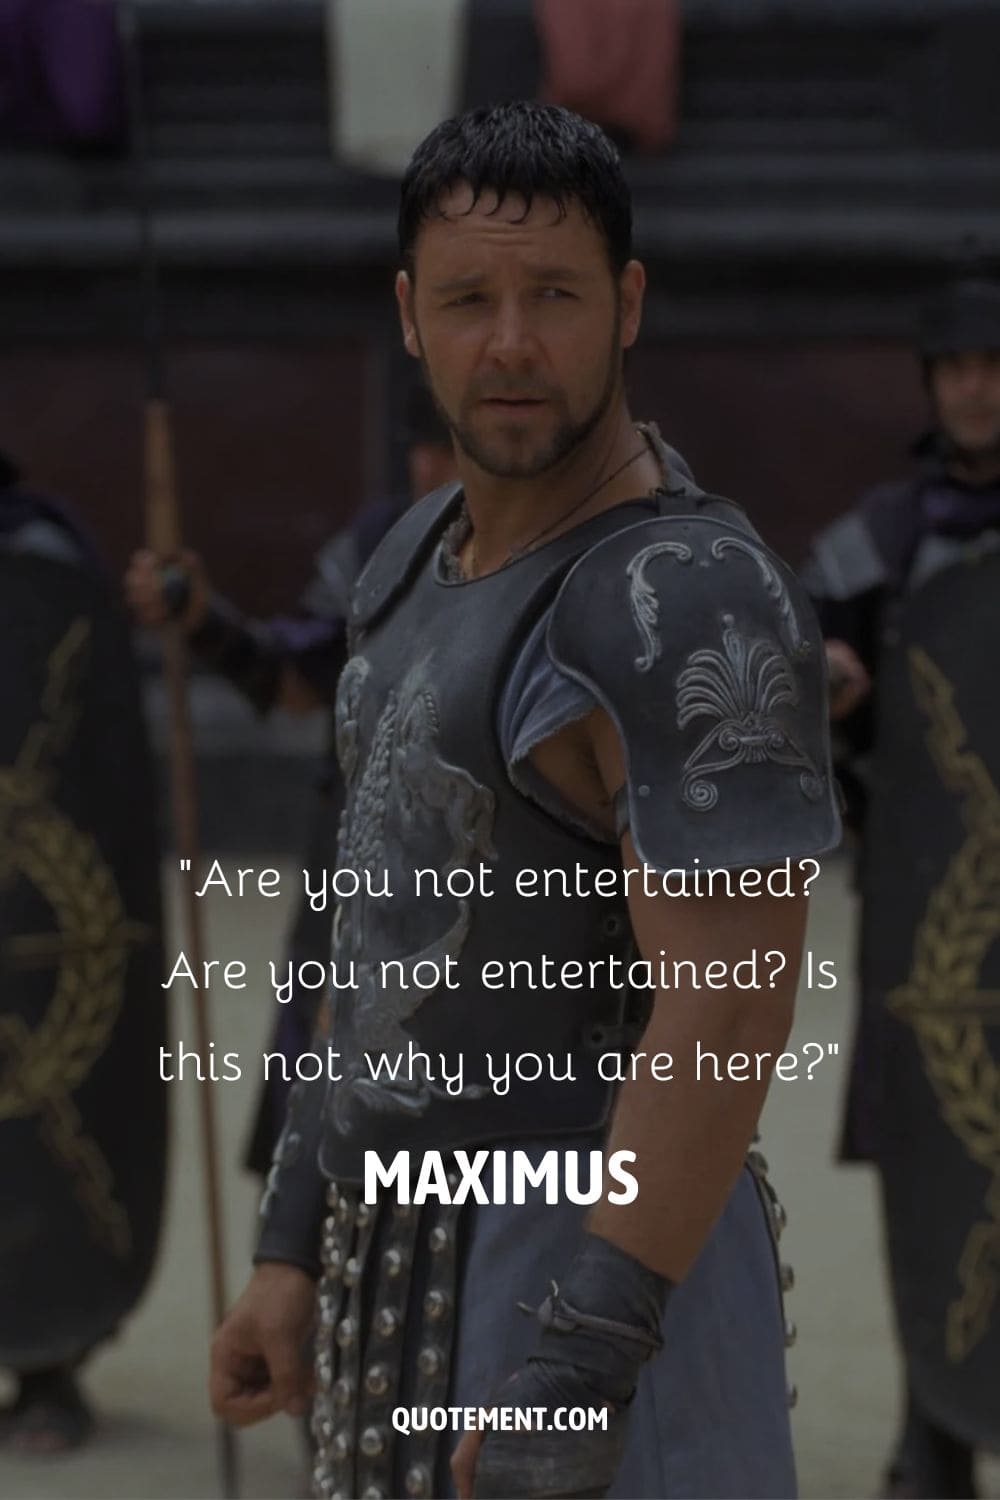 Image of Maximus representing are you not entertained quote.